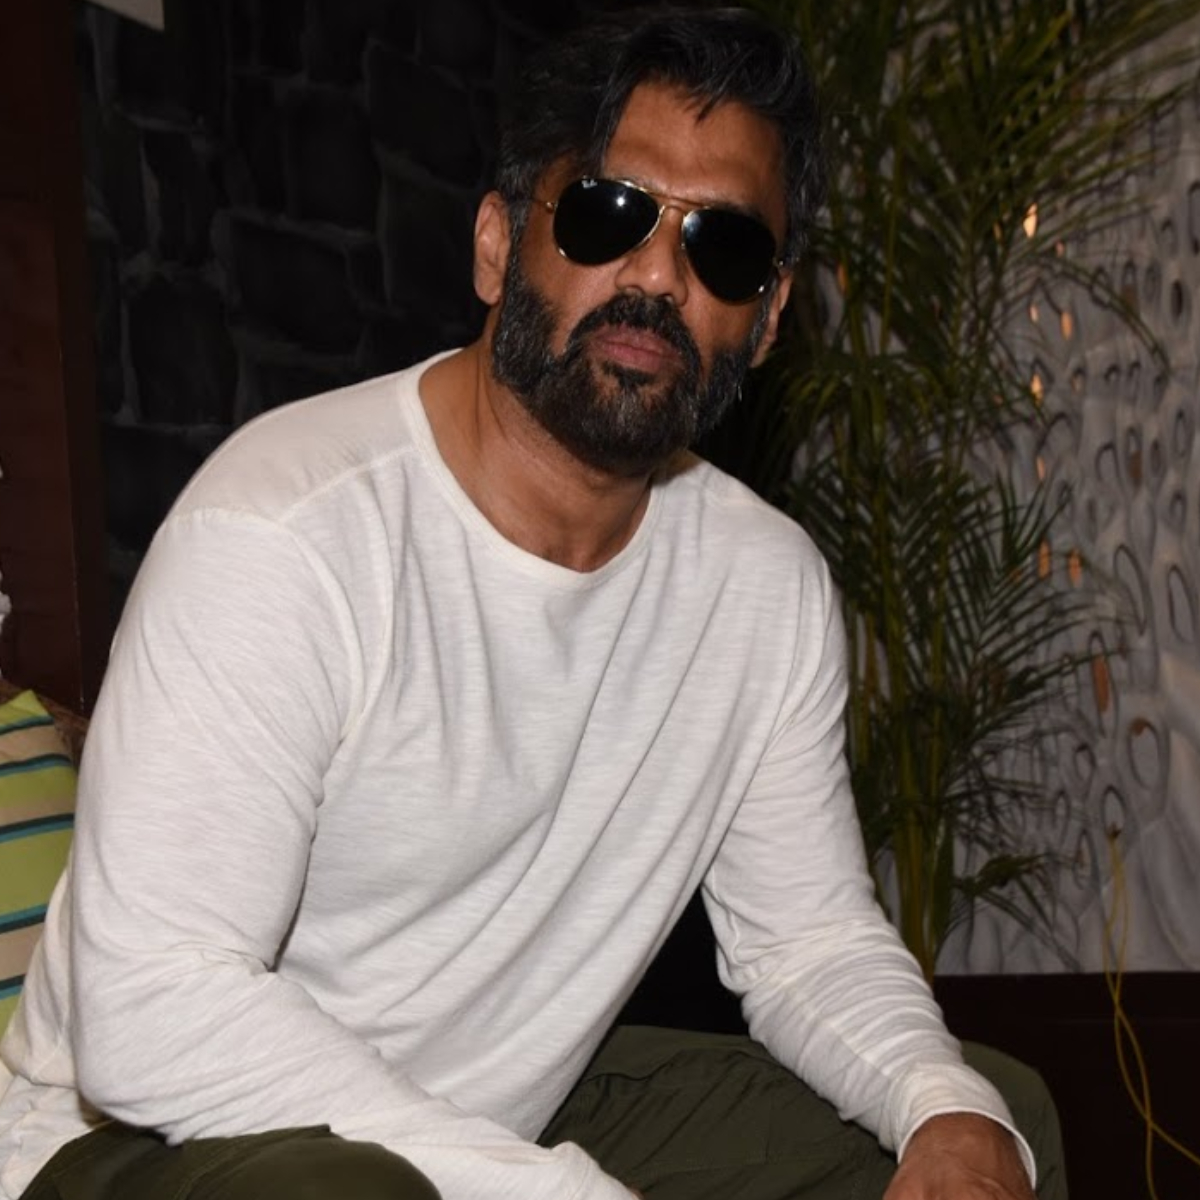 EXCLUSIVE: Suniel Shetty says govt needs to lend support in form of subsidies & tax rebates to revive theatres